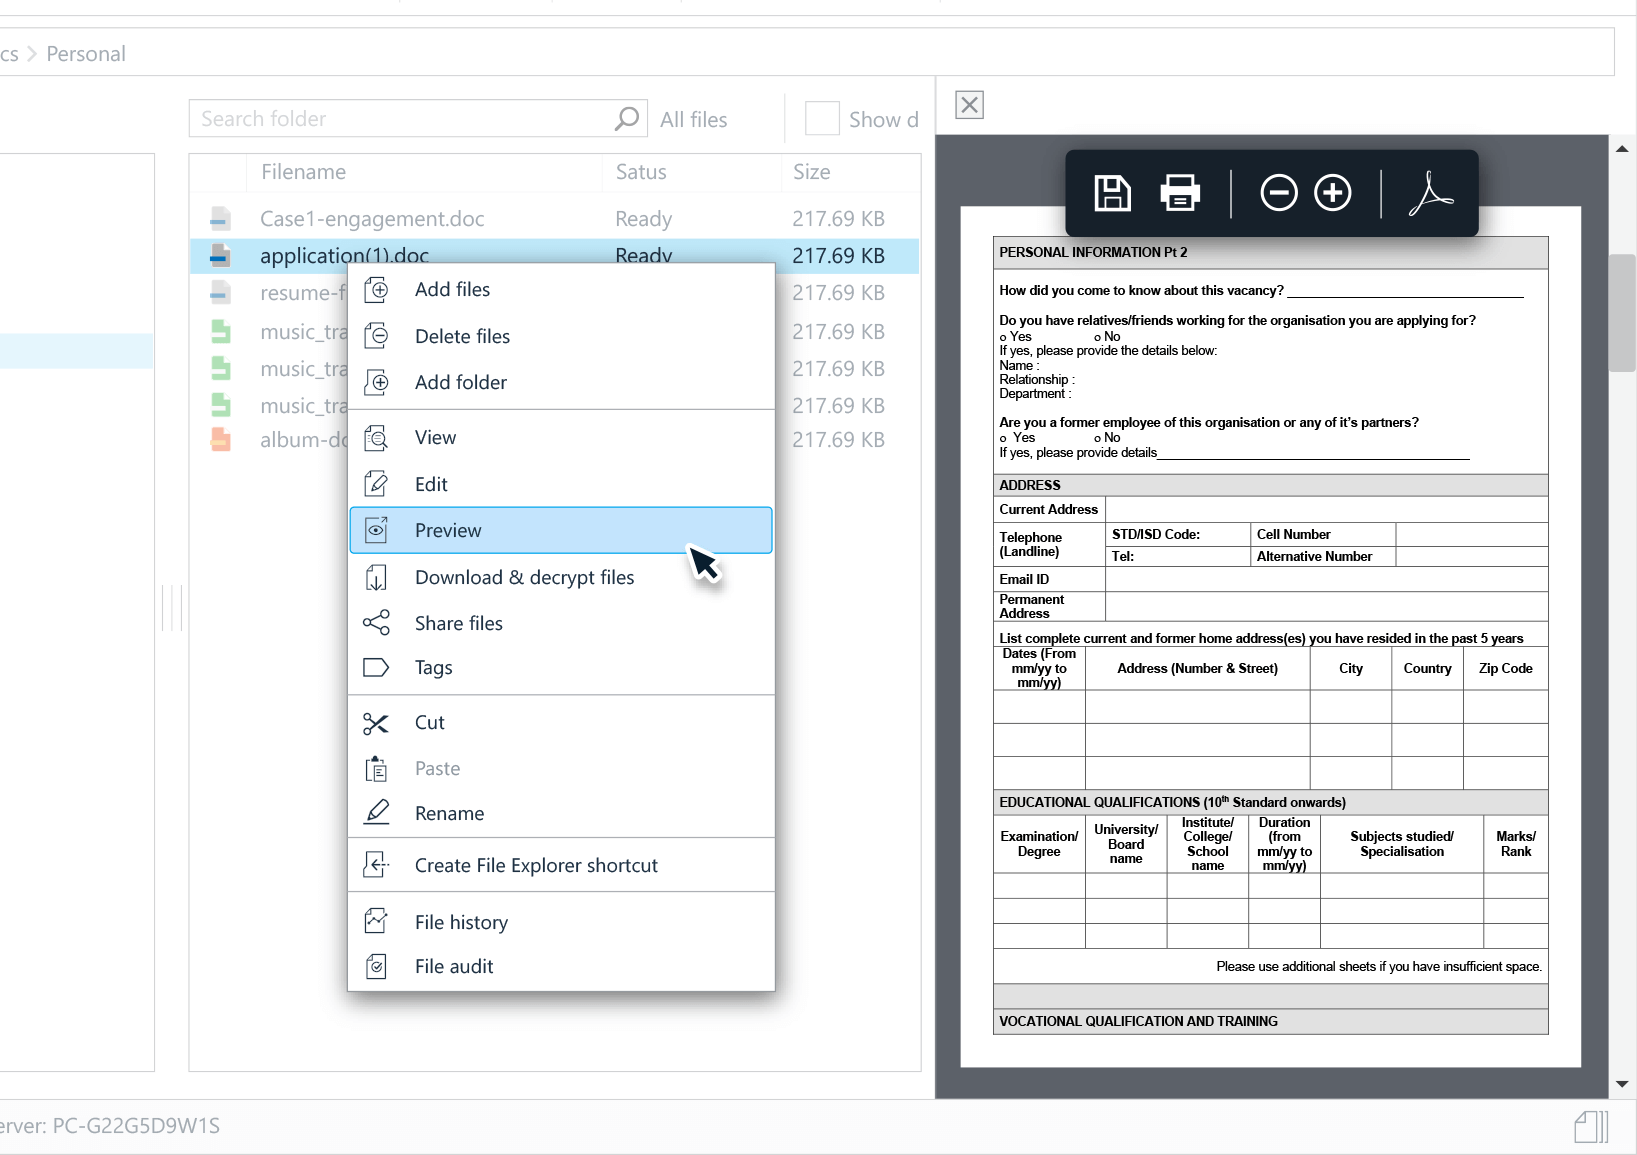 Viewing your files in the File Manager quick preview.